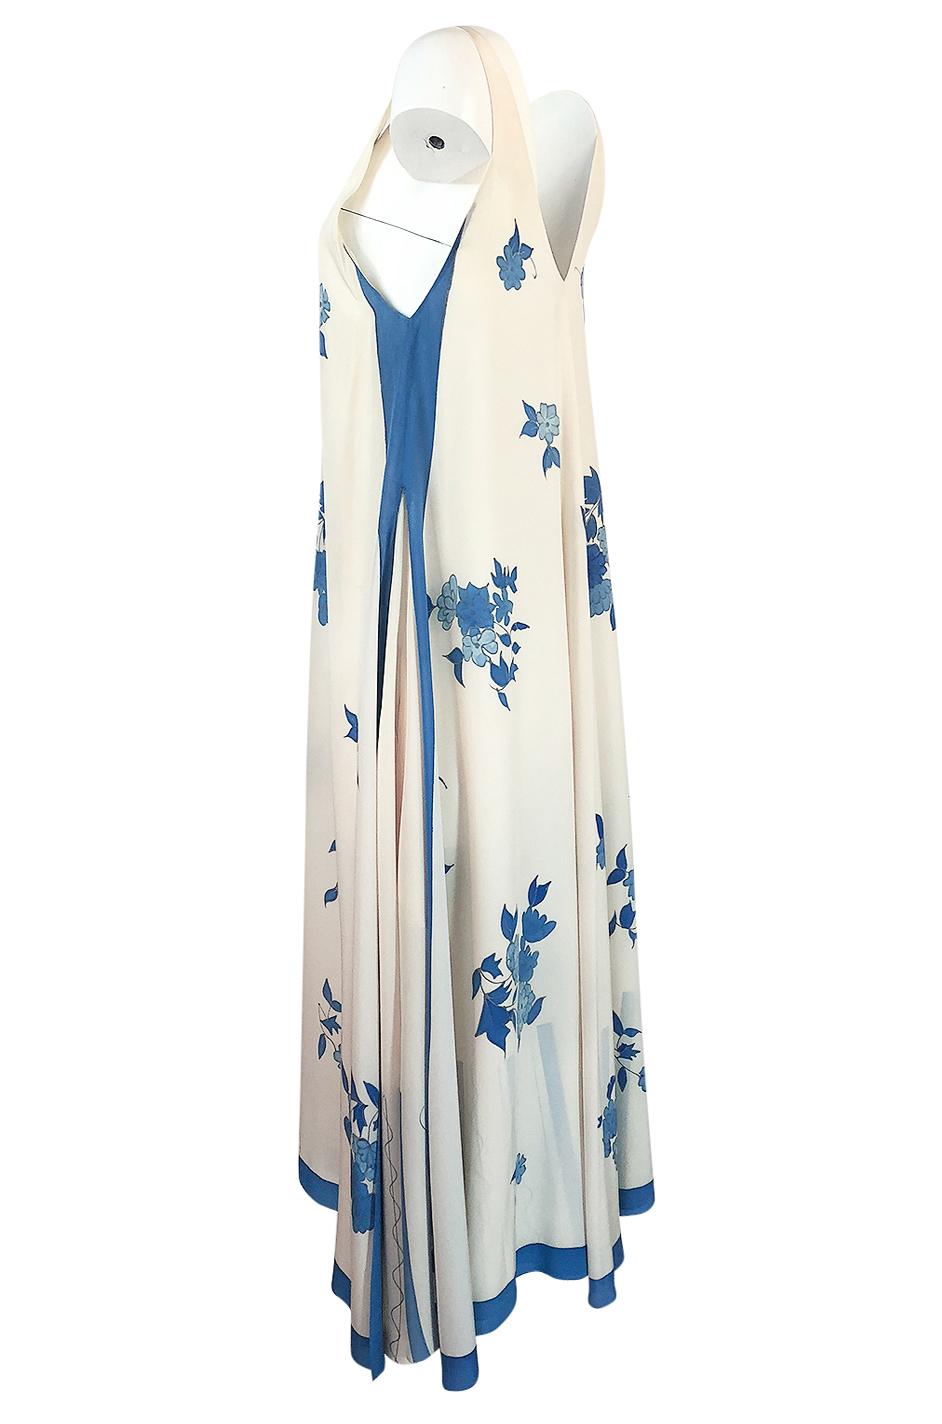 Karl Lagerfeld for Chloe Blue Floral Print Silk Print Dress and Capelet, c 1974 2